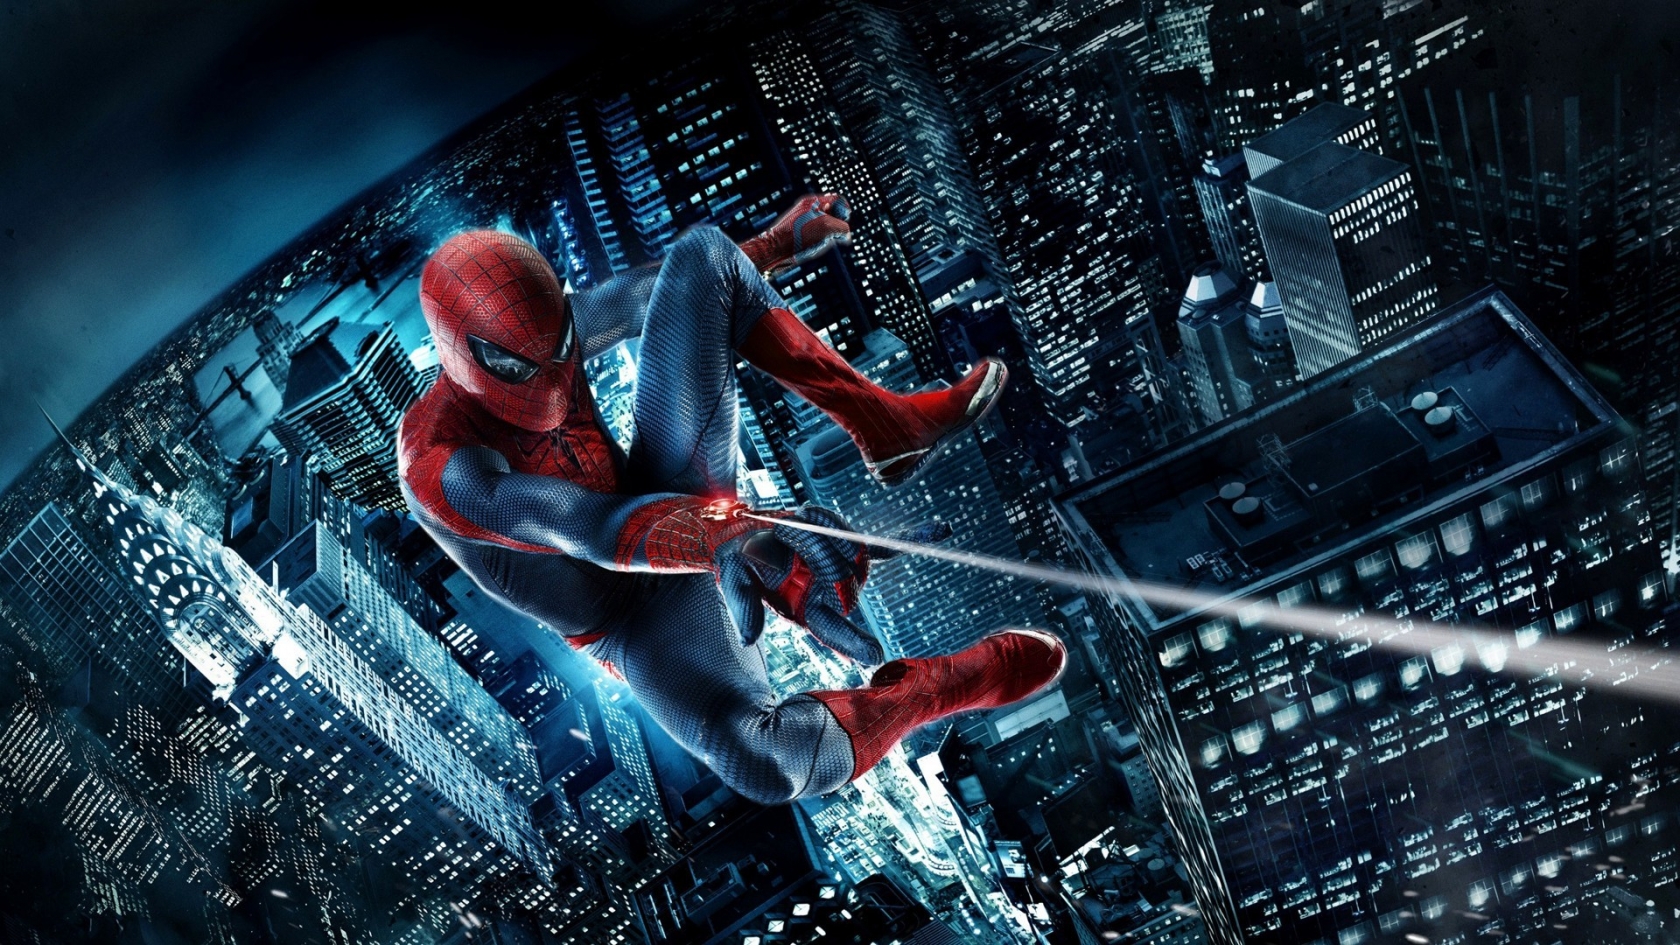 The Amazing SpiderMan 2 for 1680 x 945 HDTV resolution